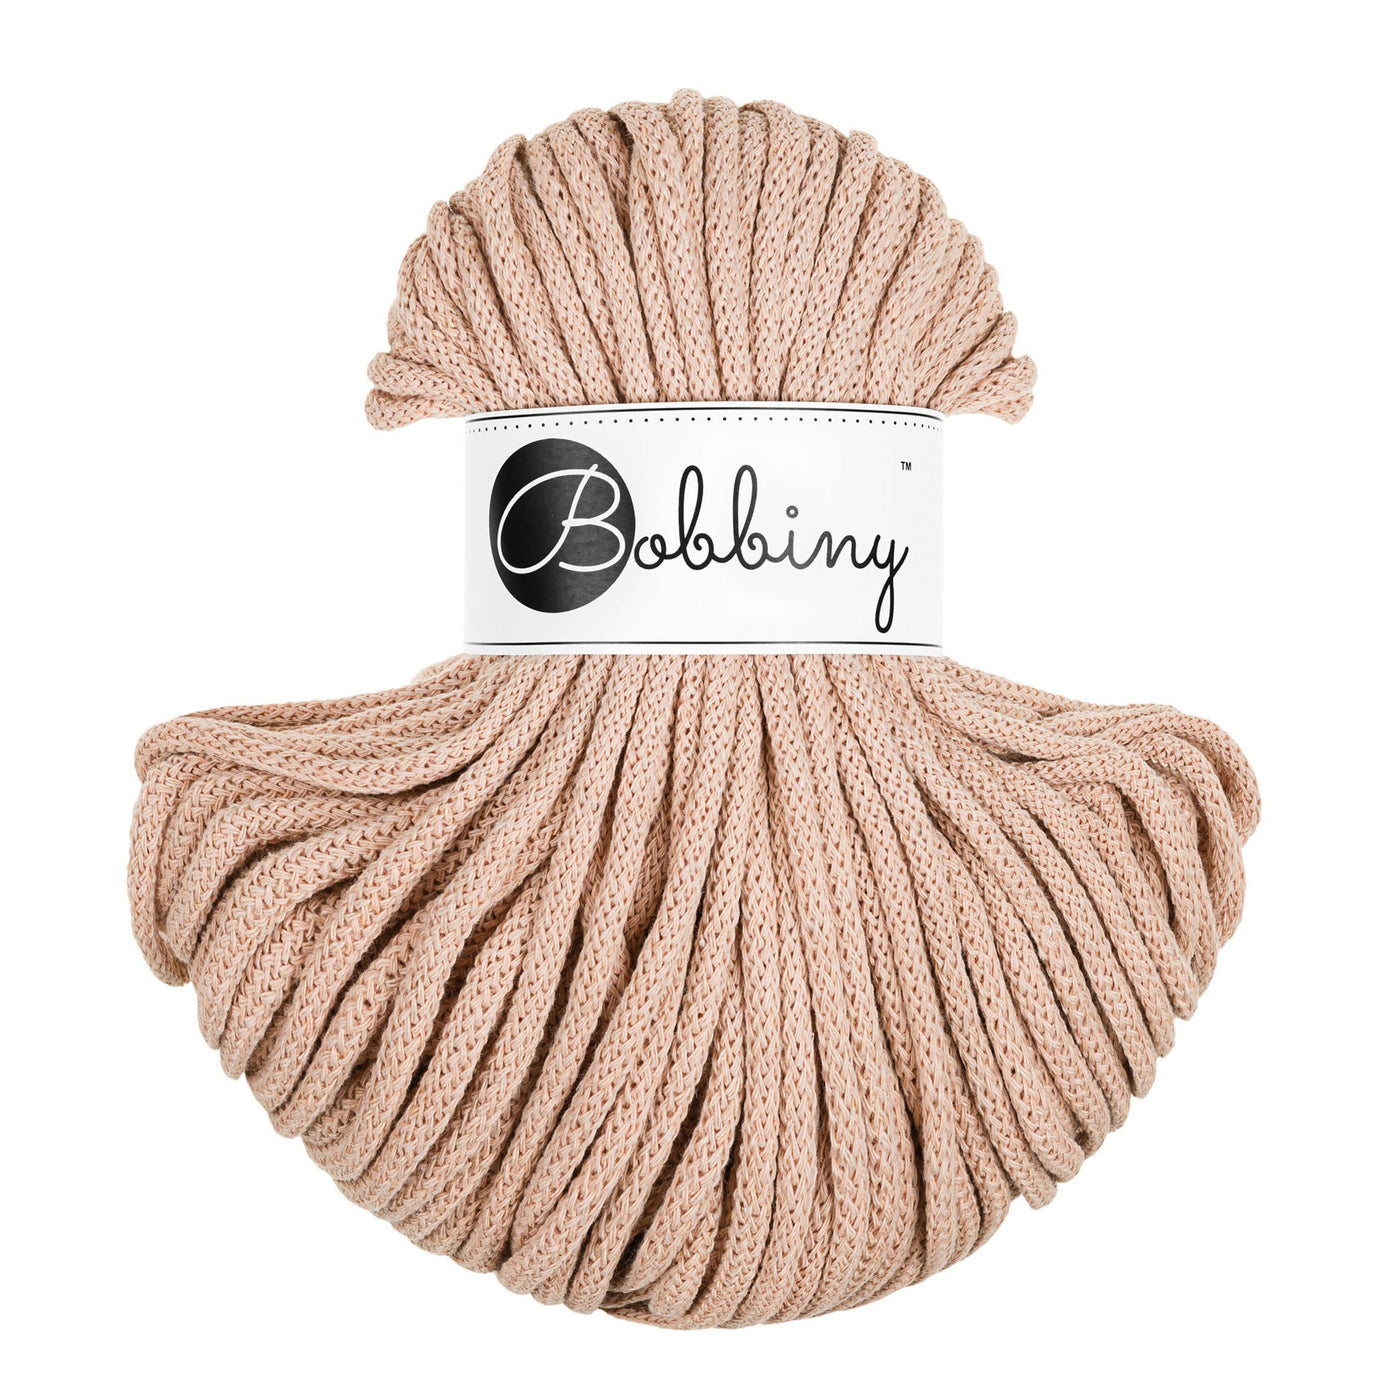 Bobbiny braided cord 5mm 50m in biscuit shade